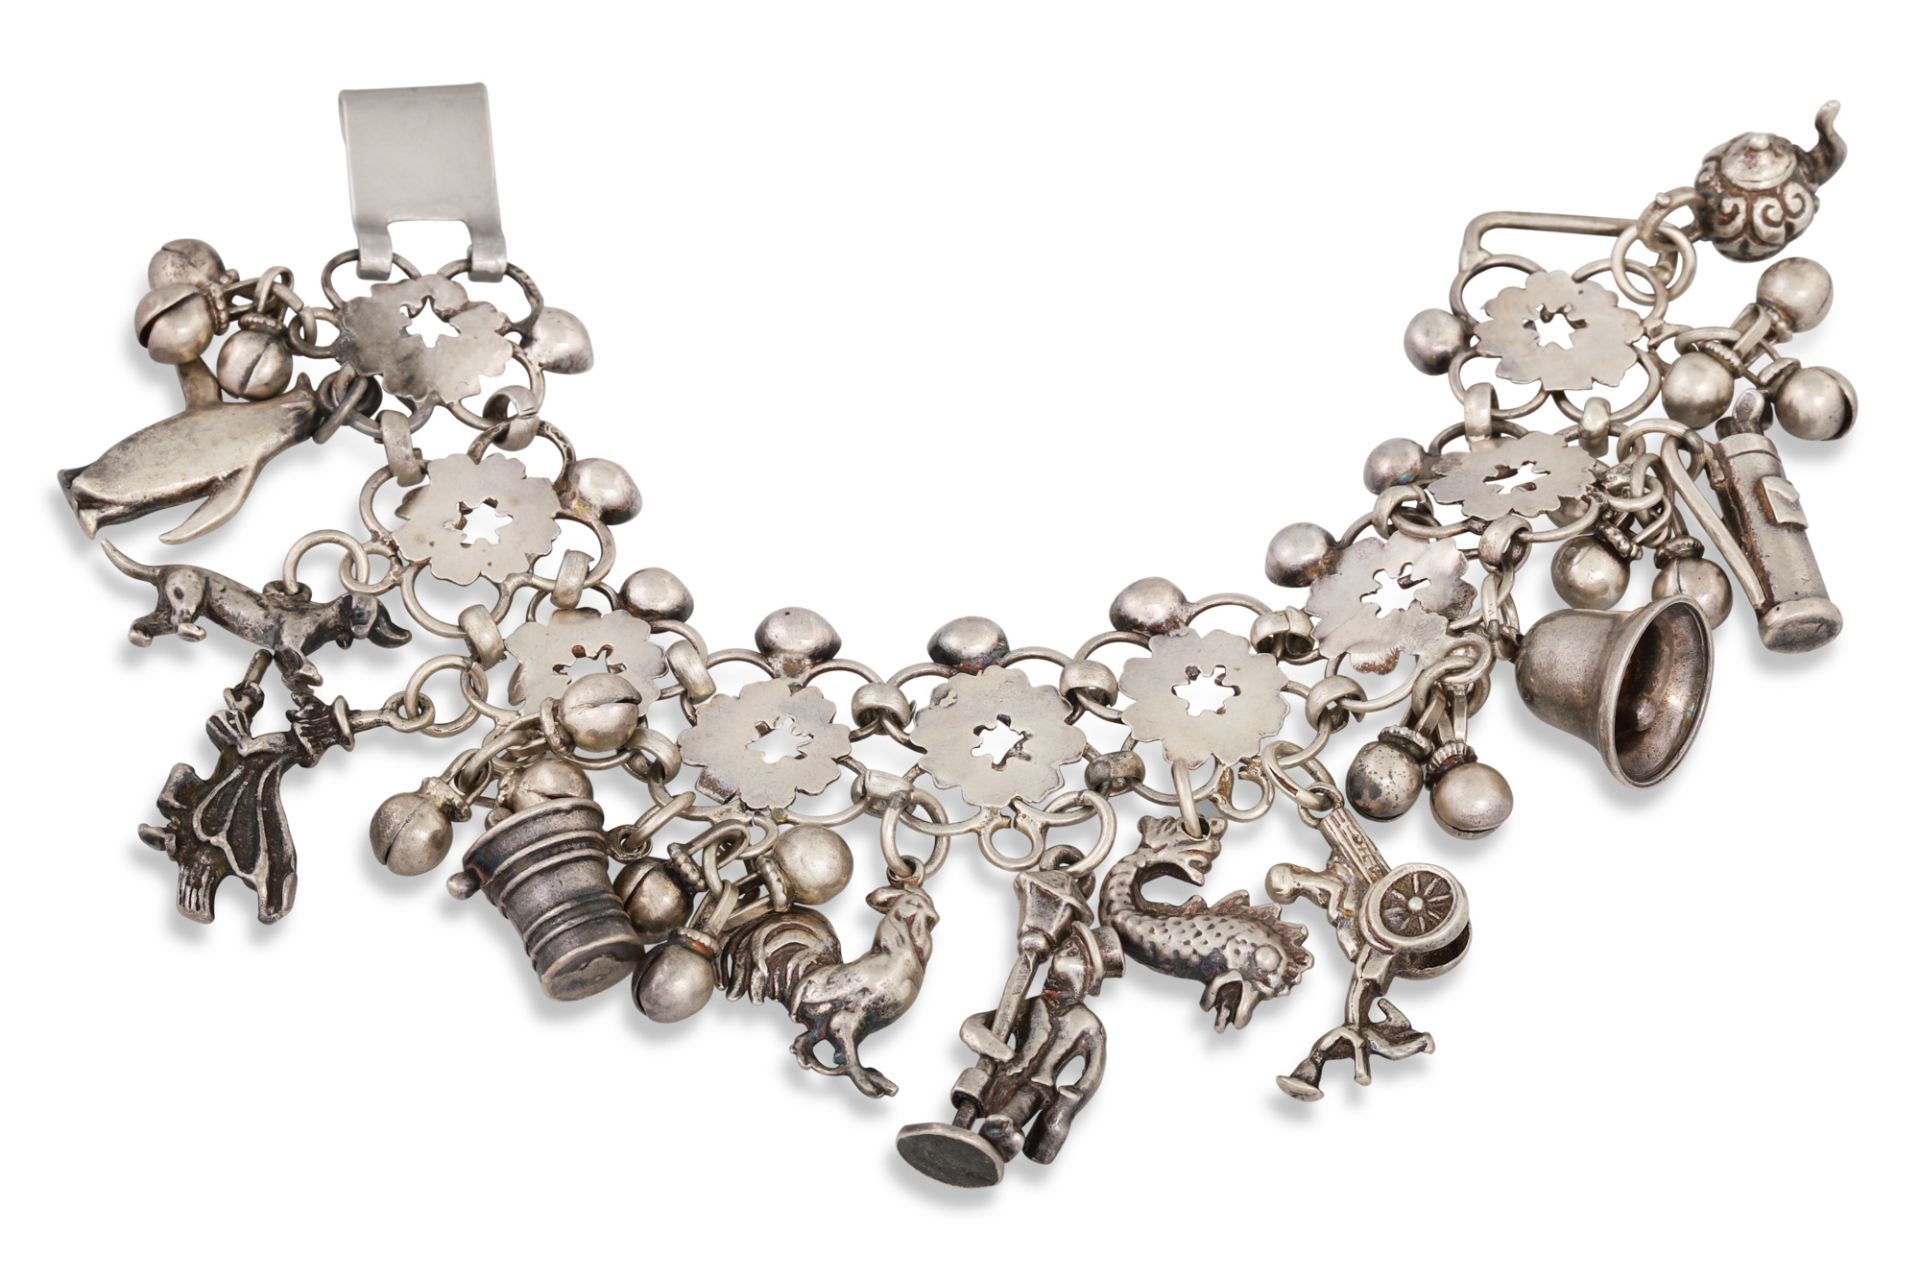 A LATE VICTORIAN SILVER CHARM BRACELET, suspending various charms